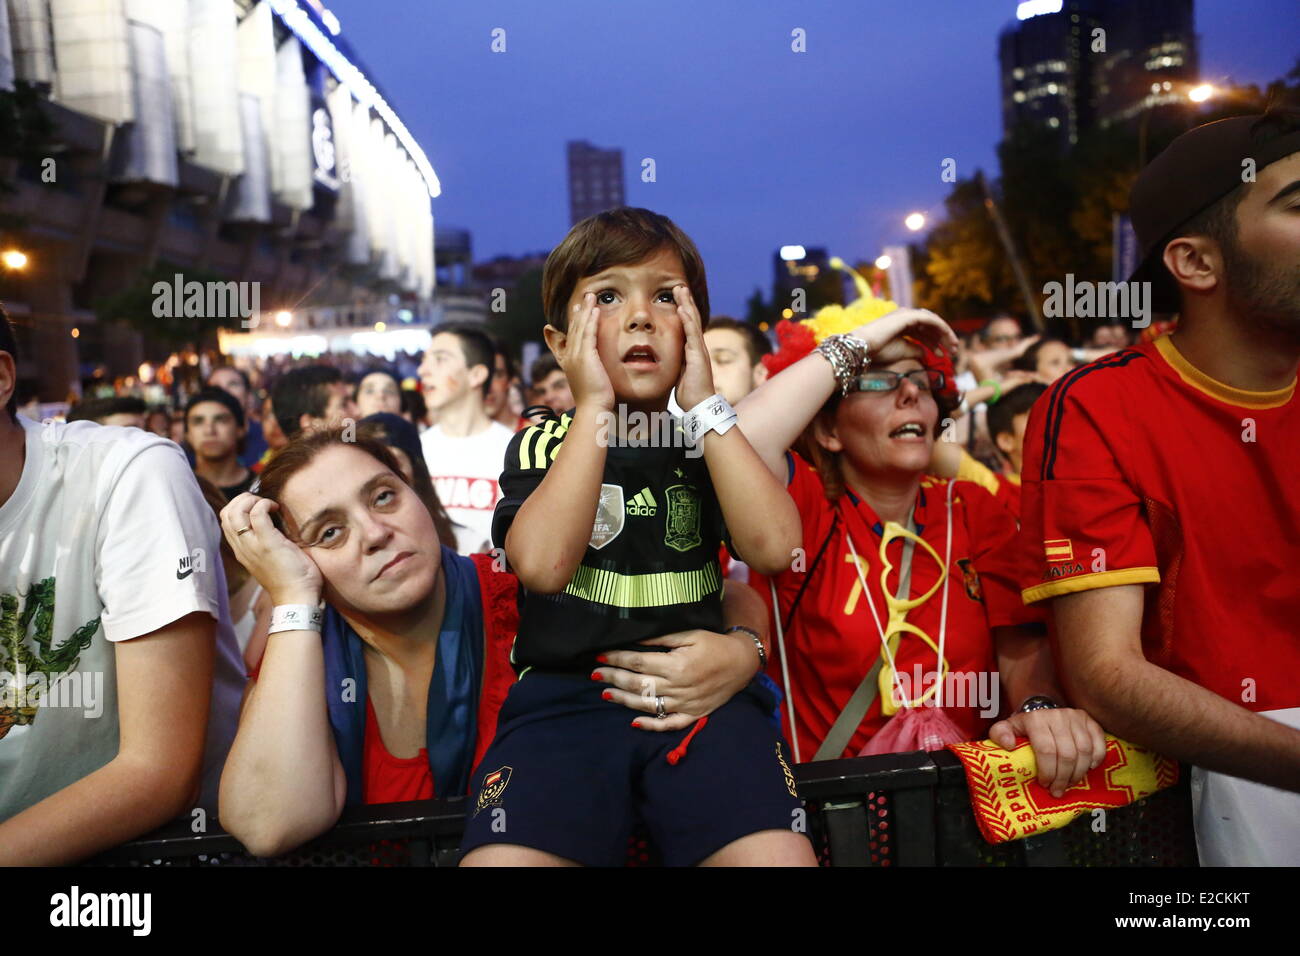 Madrid, Spain. 19th June, 2014. Spanish people reacts during the World Cup soccer match between Spain and Chile, in Madrid, Spain, Wednesday, June 18, 2014. Defending champions Spain slumped to a 2-0 defeat to Chile and crashed out of the World Cup after their second defeat in five days. Chile's victory today - through goals from Eduardo Vargas and Charles Arranguiz - made the South Americans and the Netherlands the first teams to go through to the second round. Credit:  Javier Luengo/NurPhoto/ZUMAPRESS.com/Alamy Live News Stock Photo